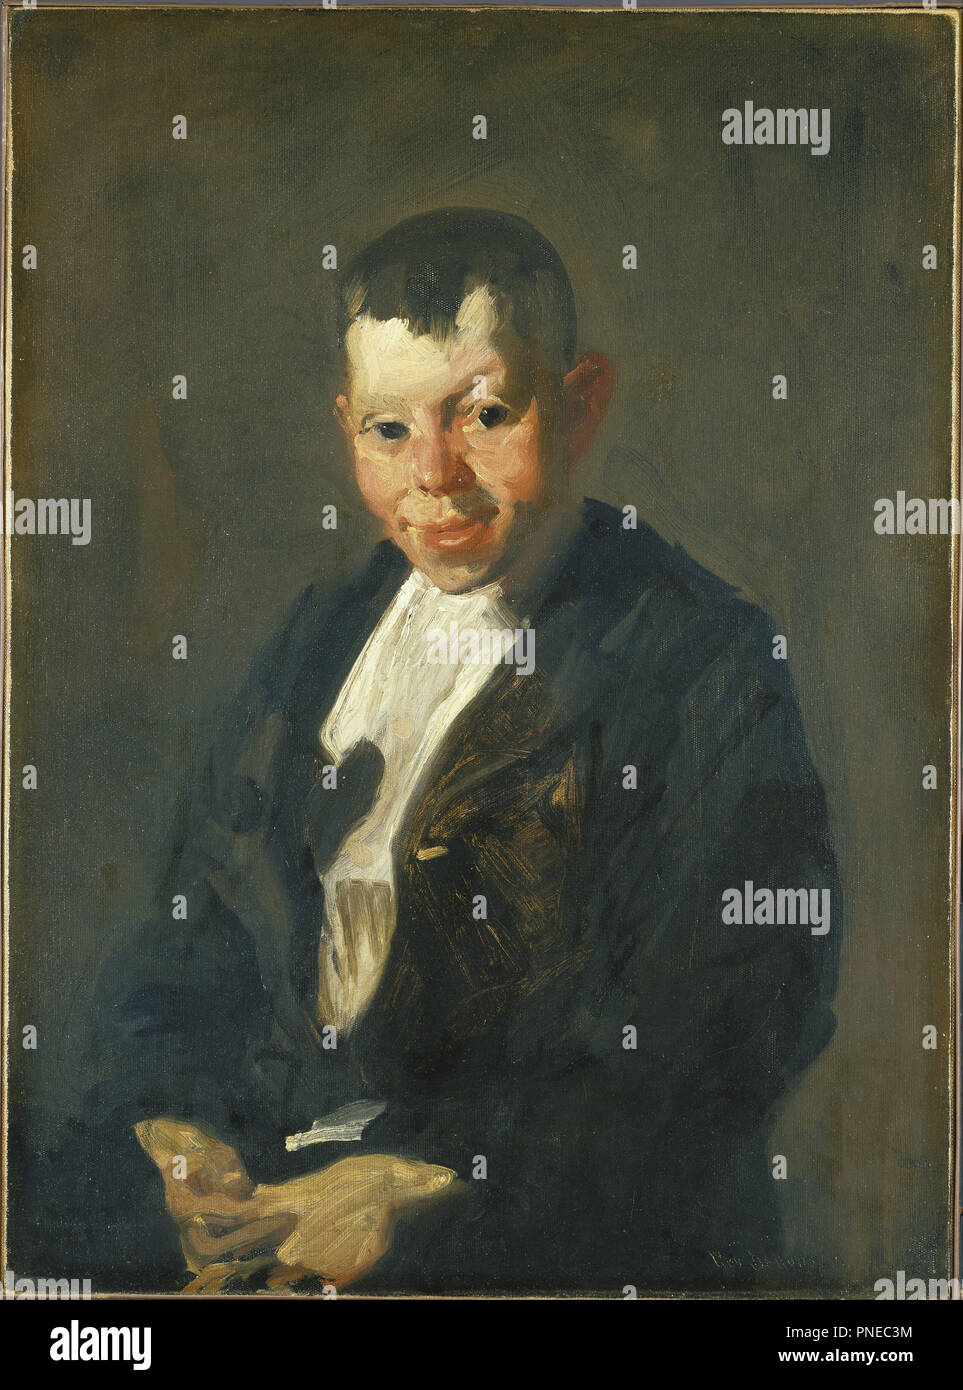 The Newsboy. Date/Period: October 1908. Painting. Oil on canvas. Height: 76.5 cm (30.1 in); Width: 56.2 cm (22.1 in). Author: George Bellows. Stock Photo